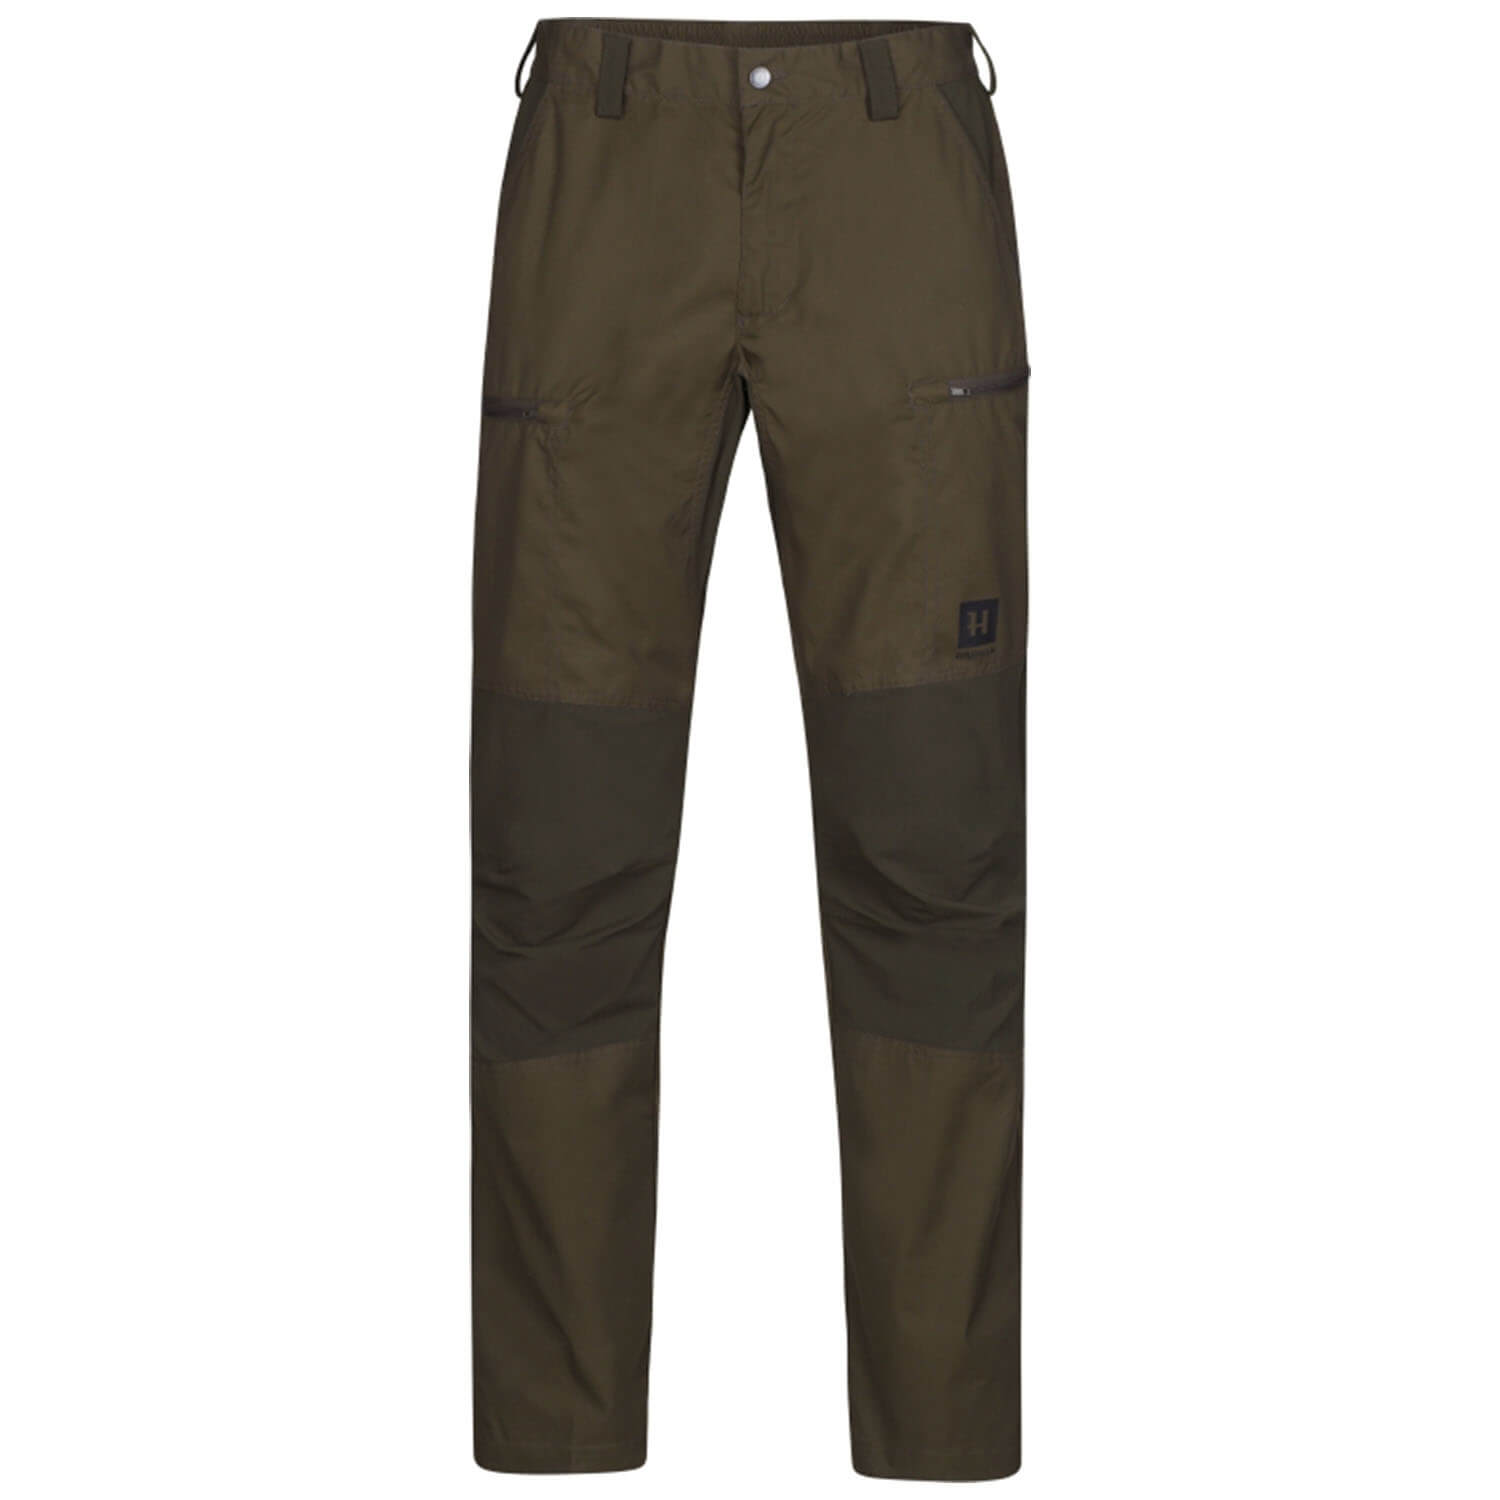 Härkila fjell Trousers (light willow green/willow green) - Hunting Trousers